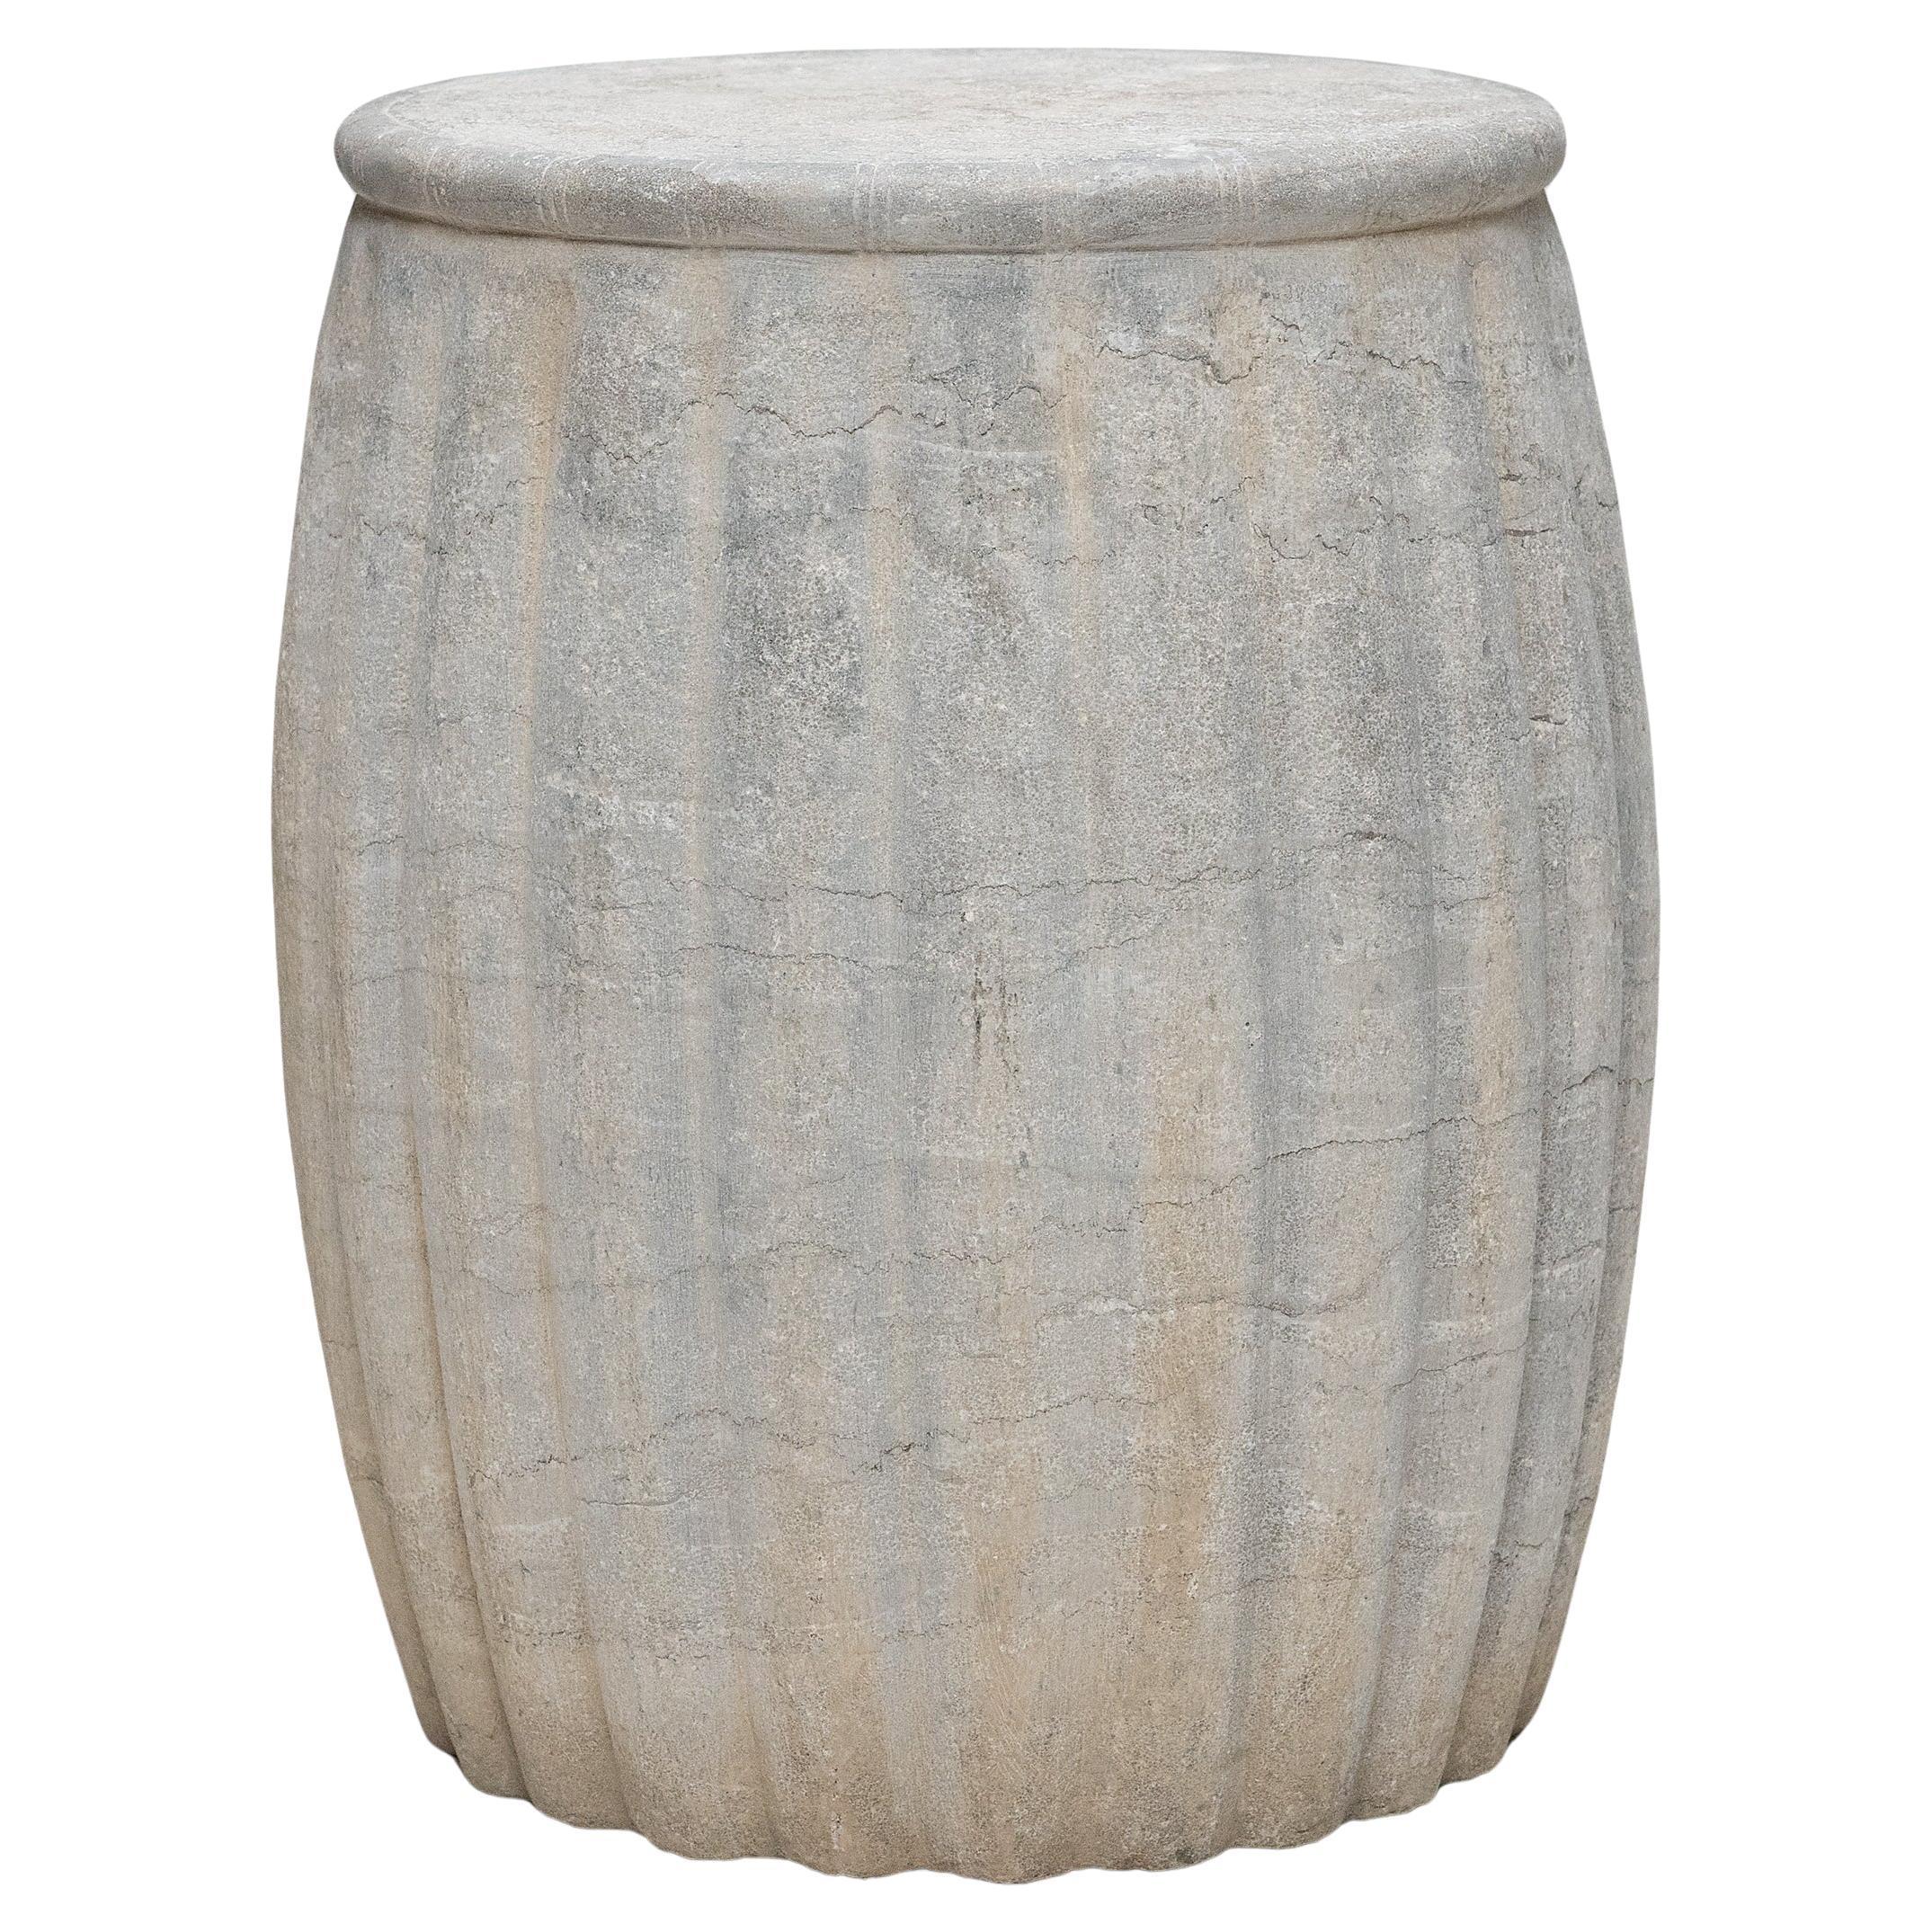 Chinese Melon Stone Drum For Sale